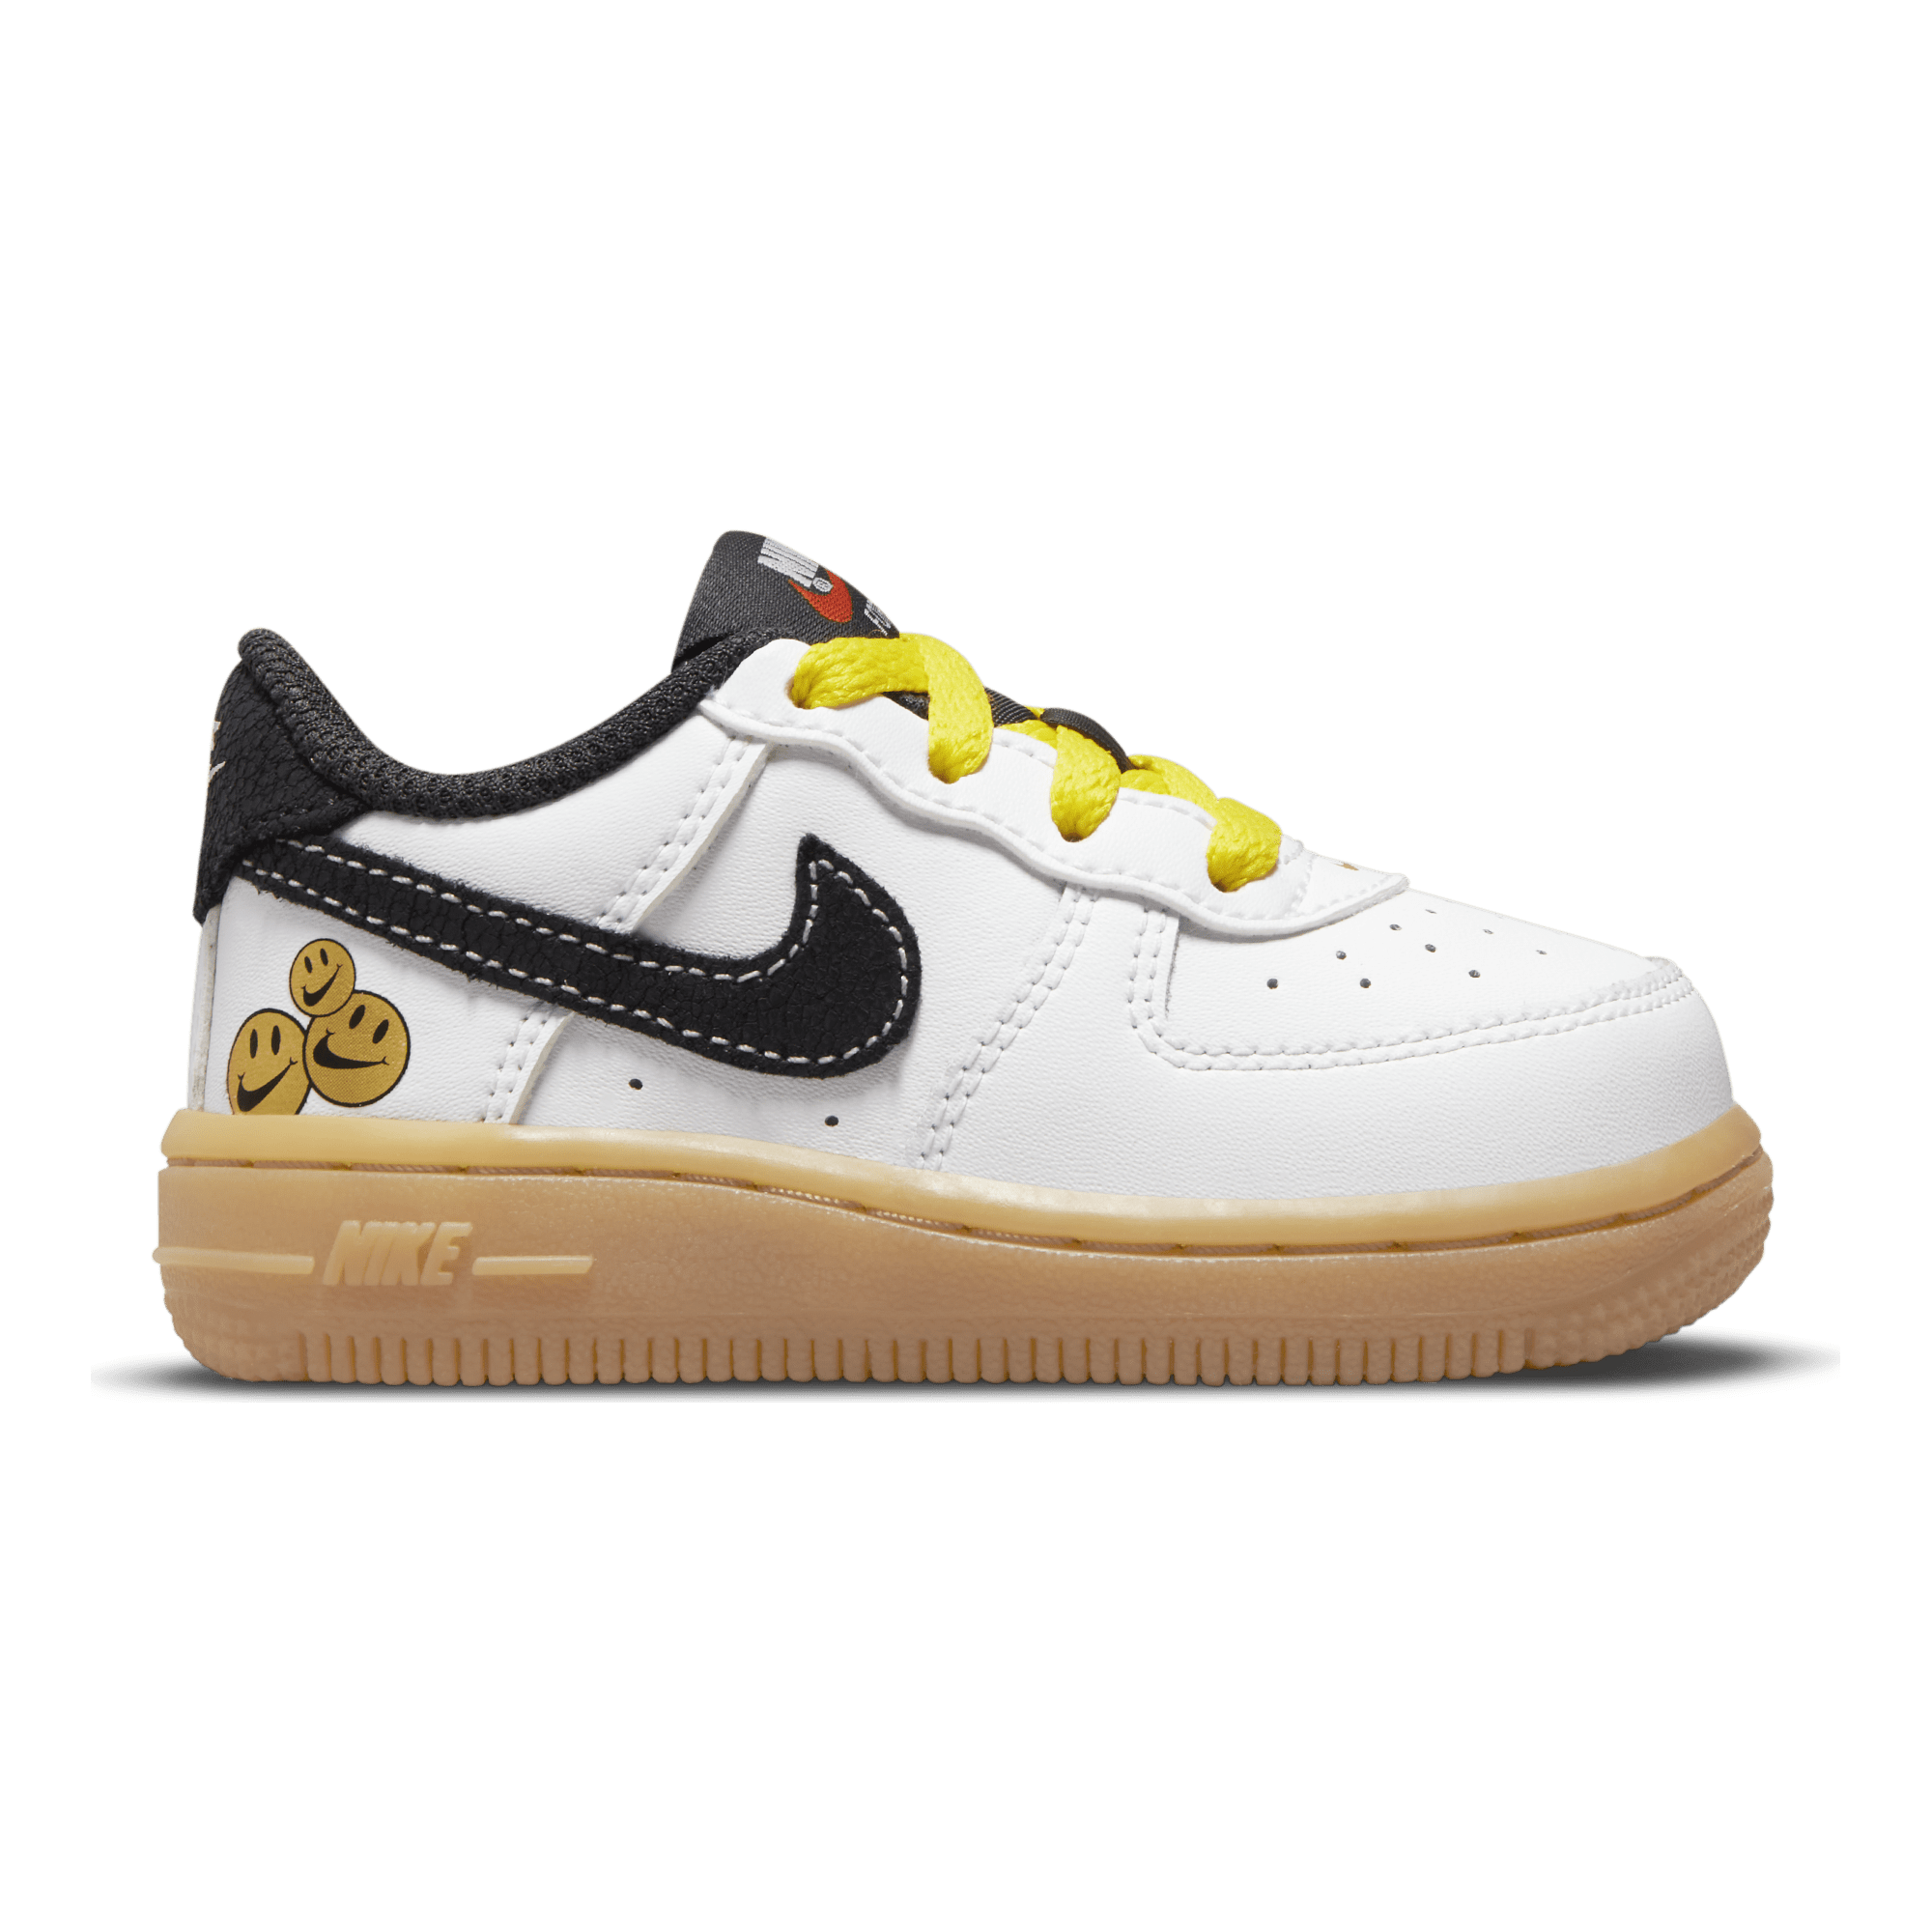 Nike Toddler Boys' Air Force 1 LV8 Shoes